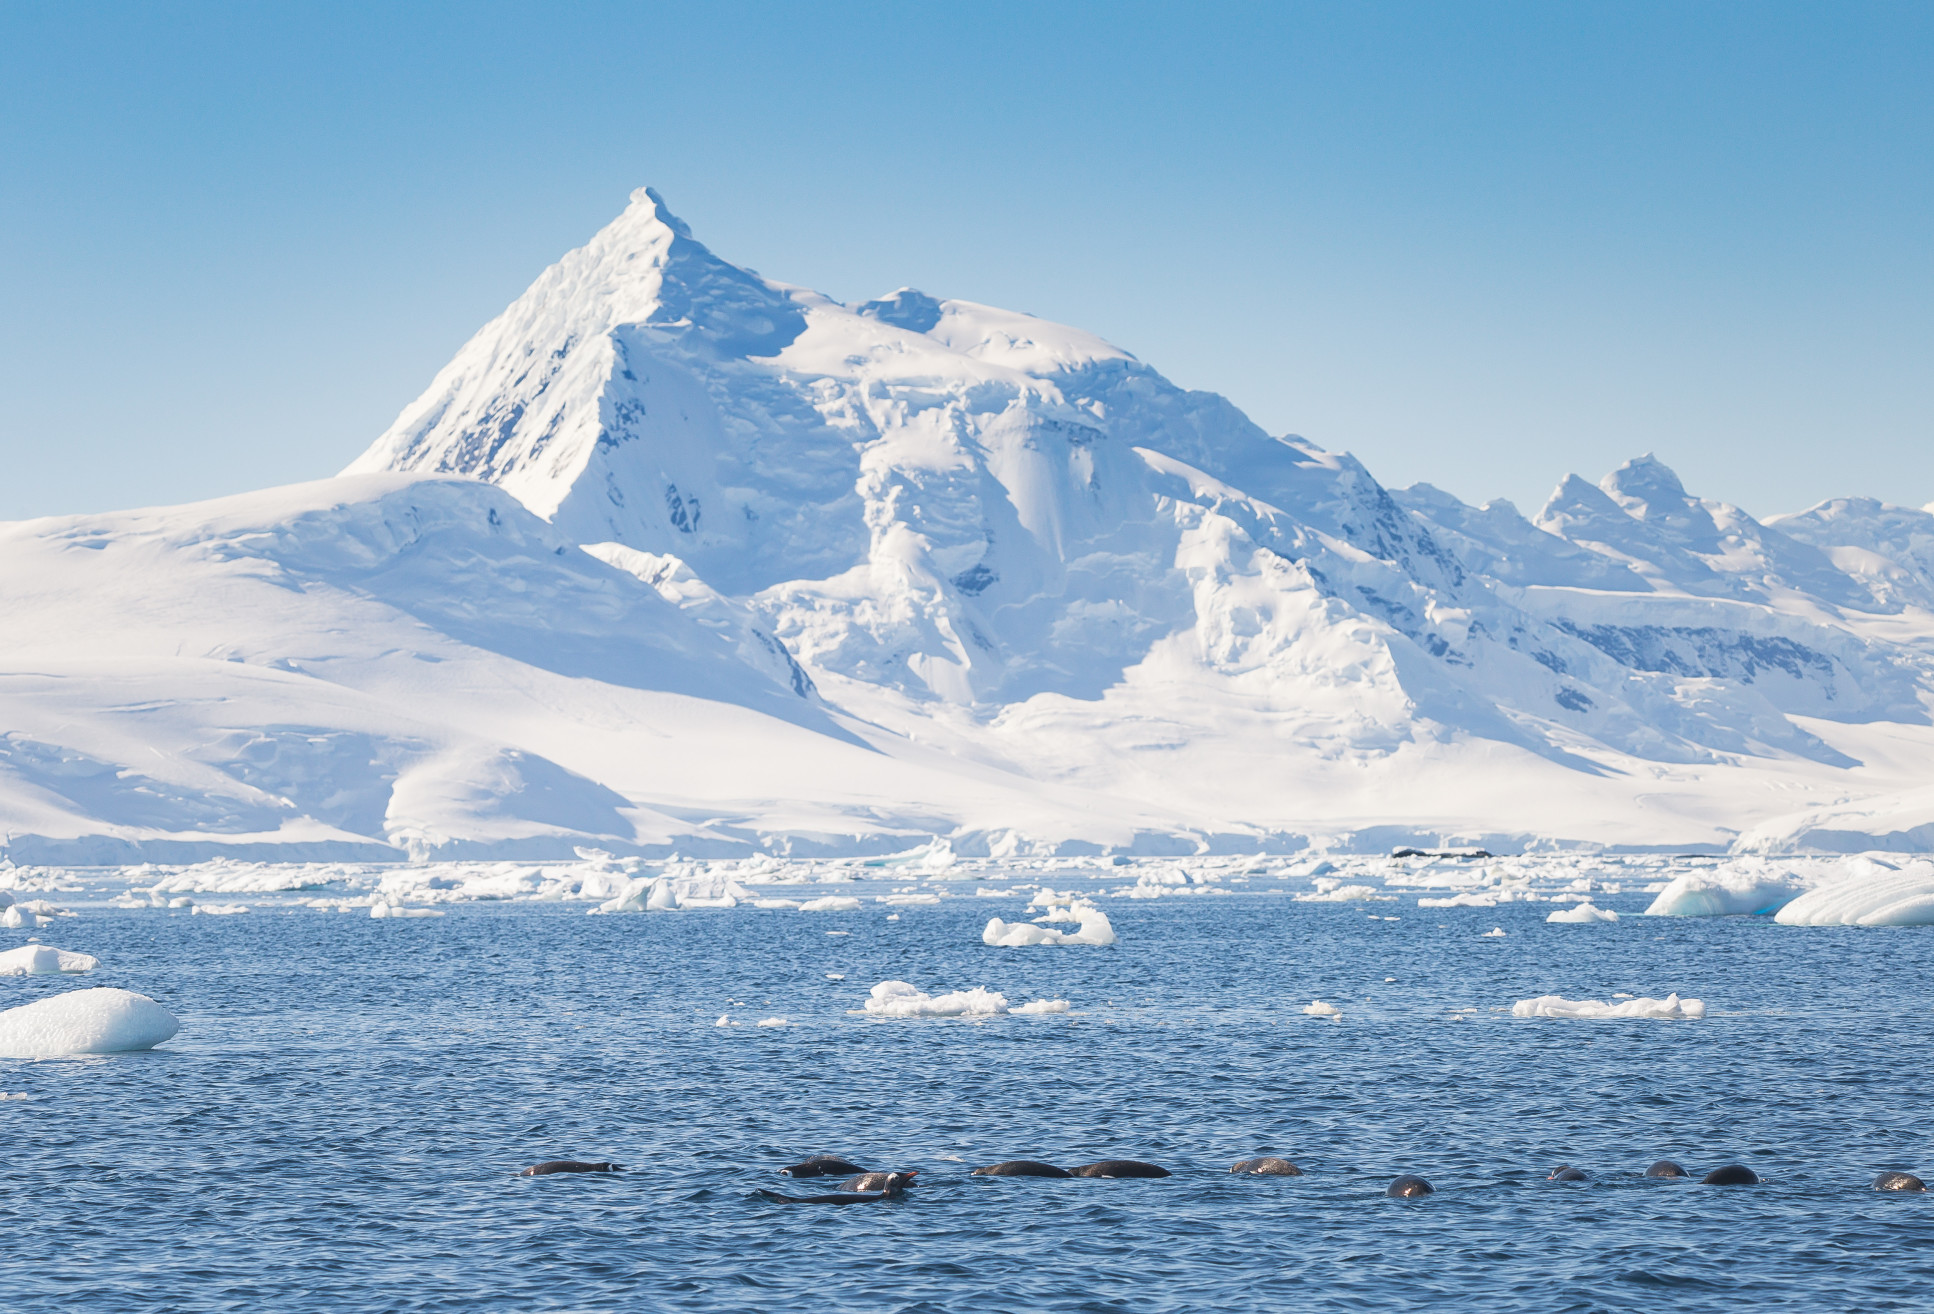 Antarctica peninsula landscape with people, ships, tender boats, penguins, icebergs and mountains